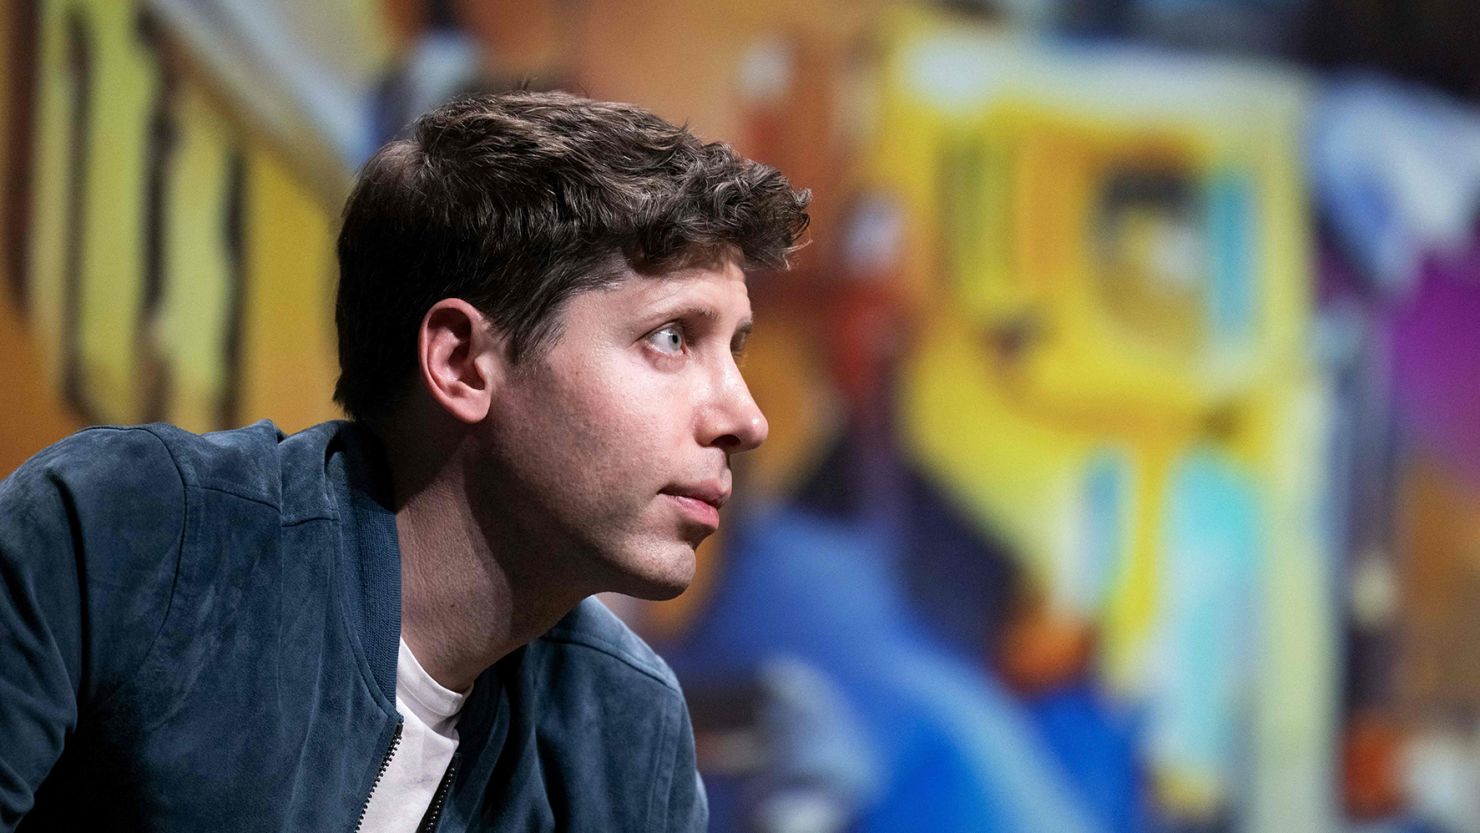 OpenAI CEO Sam Altman addresses a speech during a meeting, at the Station F in Paris on May 26, 2023.